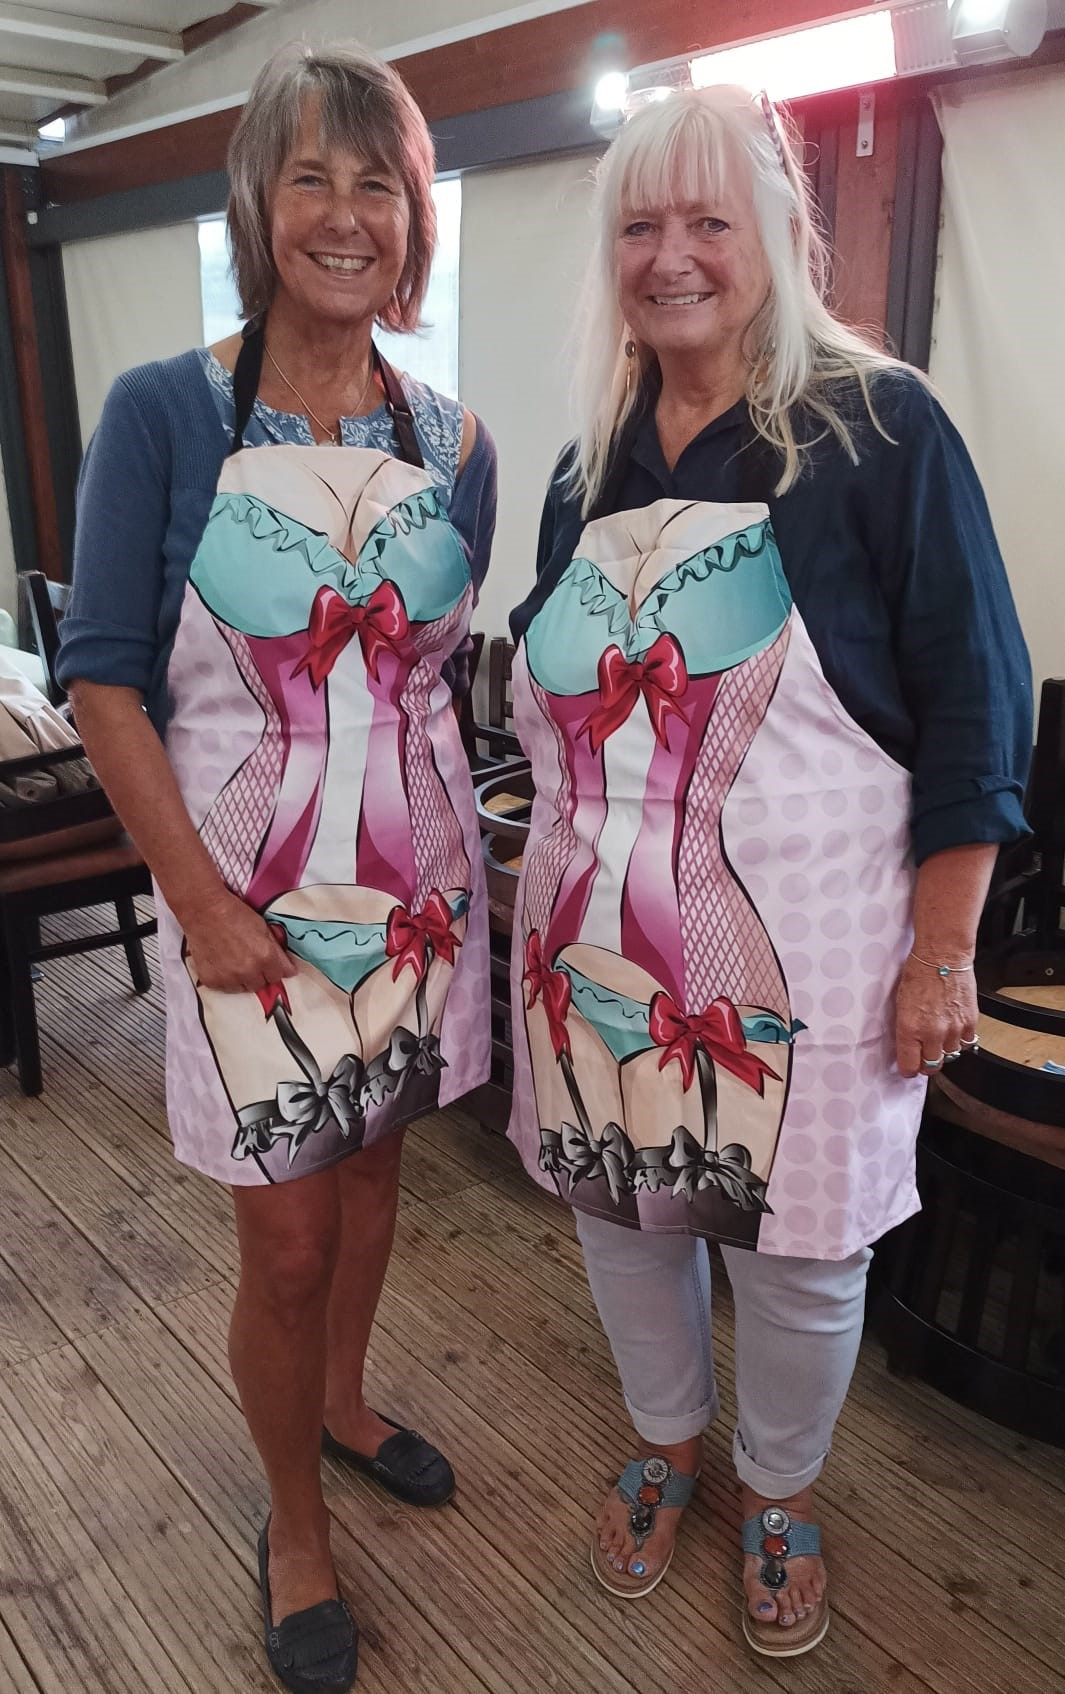 Harvest Supper 2022 pinnies